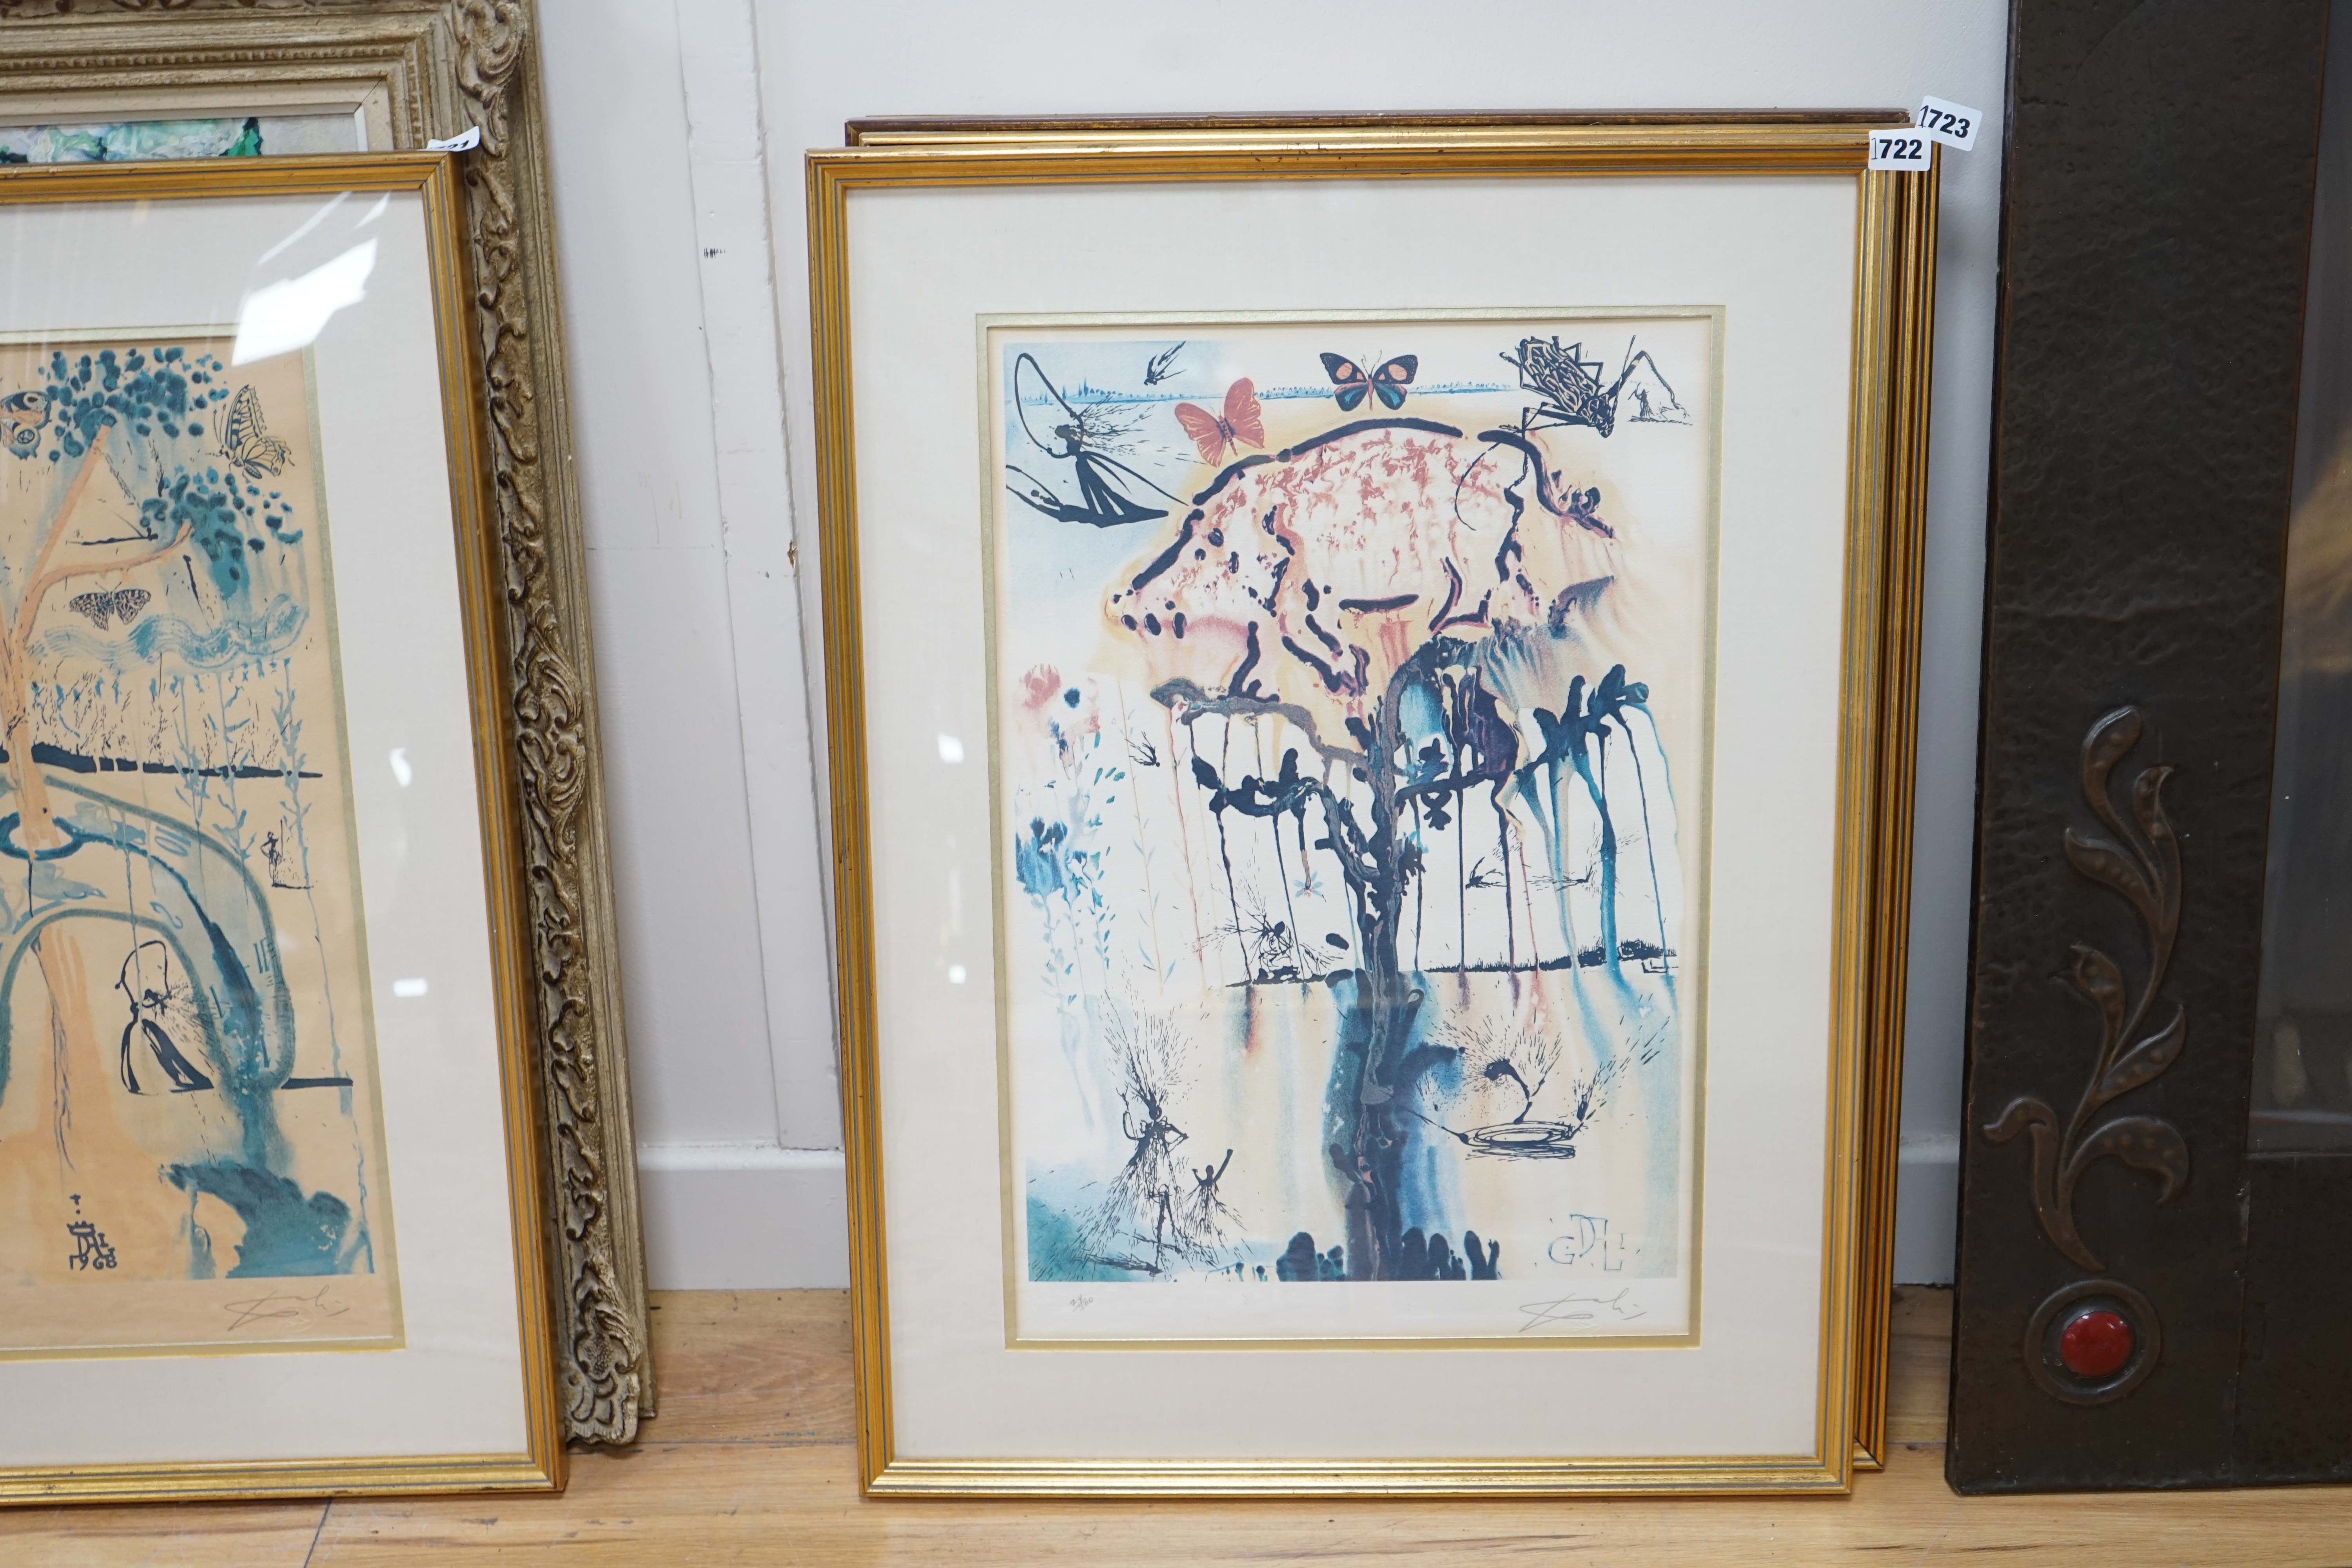 Salvador Dali (Spanish 1904-1989), colour lithograph, Alice in Wonderland, ‘ Pig and Pepper’, pencil numbered 74/300, facsimile signature, certificate of authenticity verso 56 x 37cm. Condition - fair